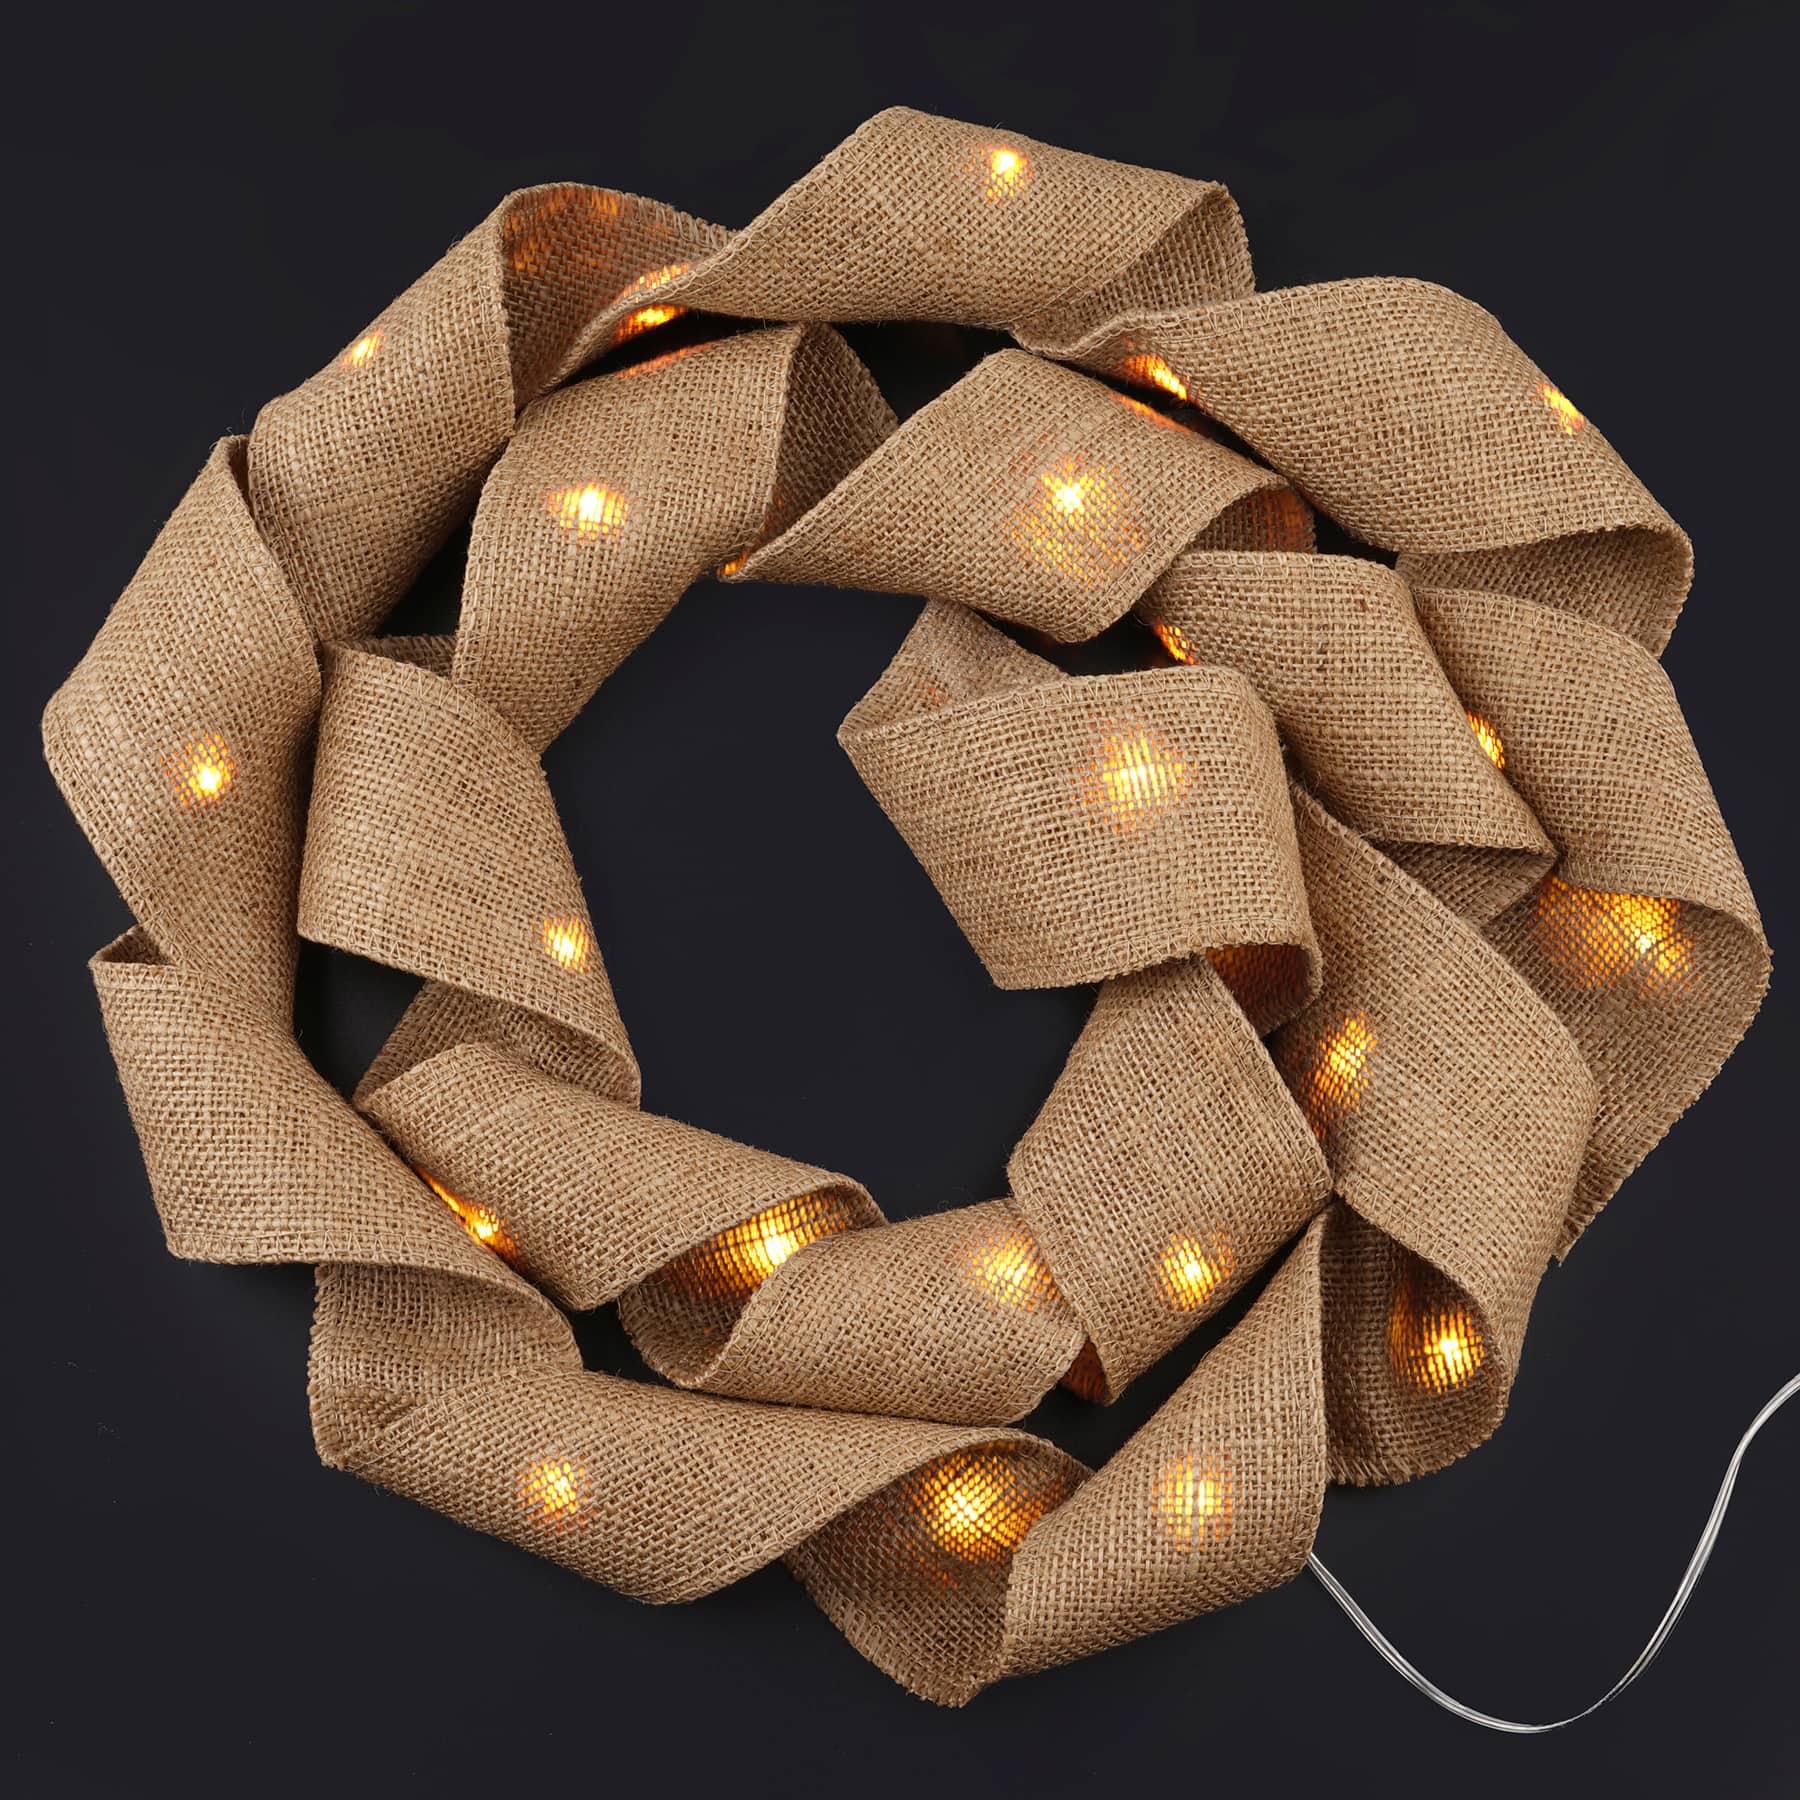 12 Pack: 30ct. LED Burlap String Lights by Ashland&#xAE; Creative Collection&#x2122;